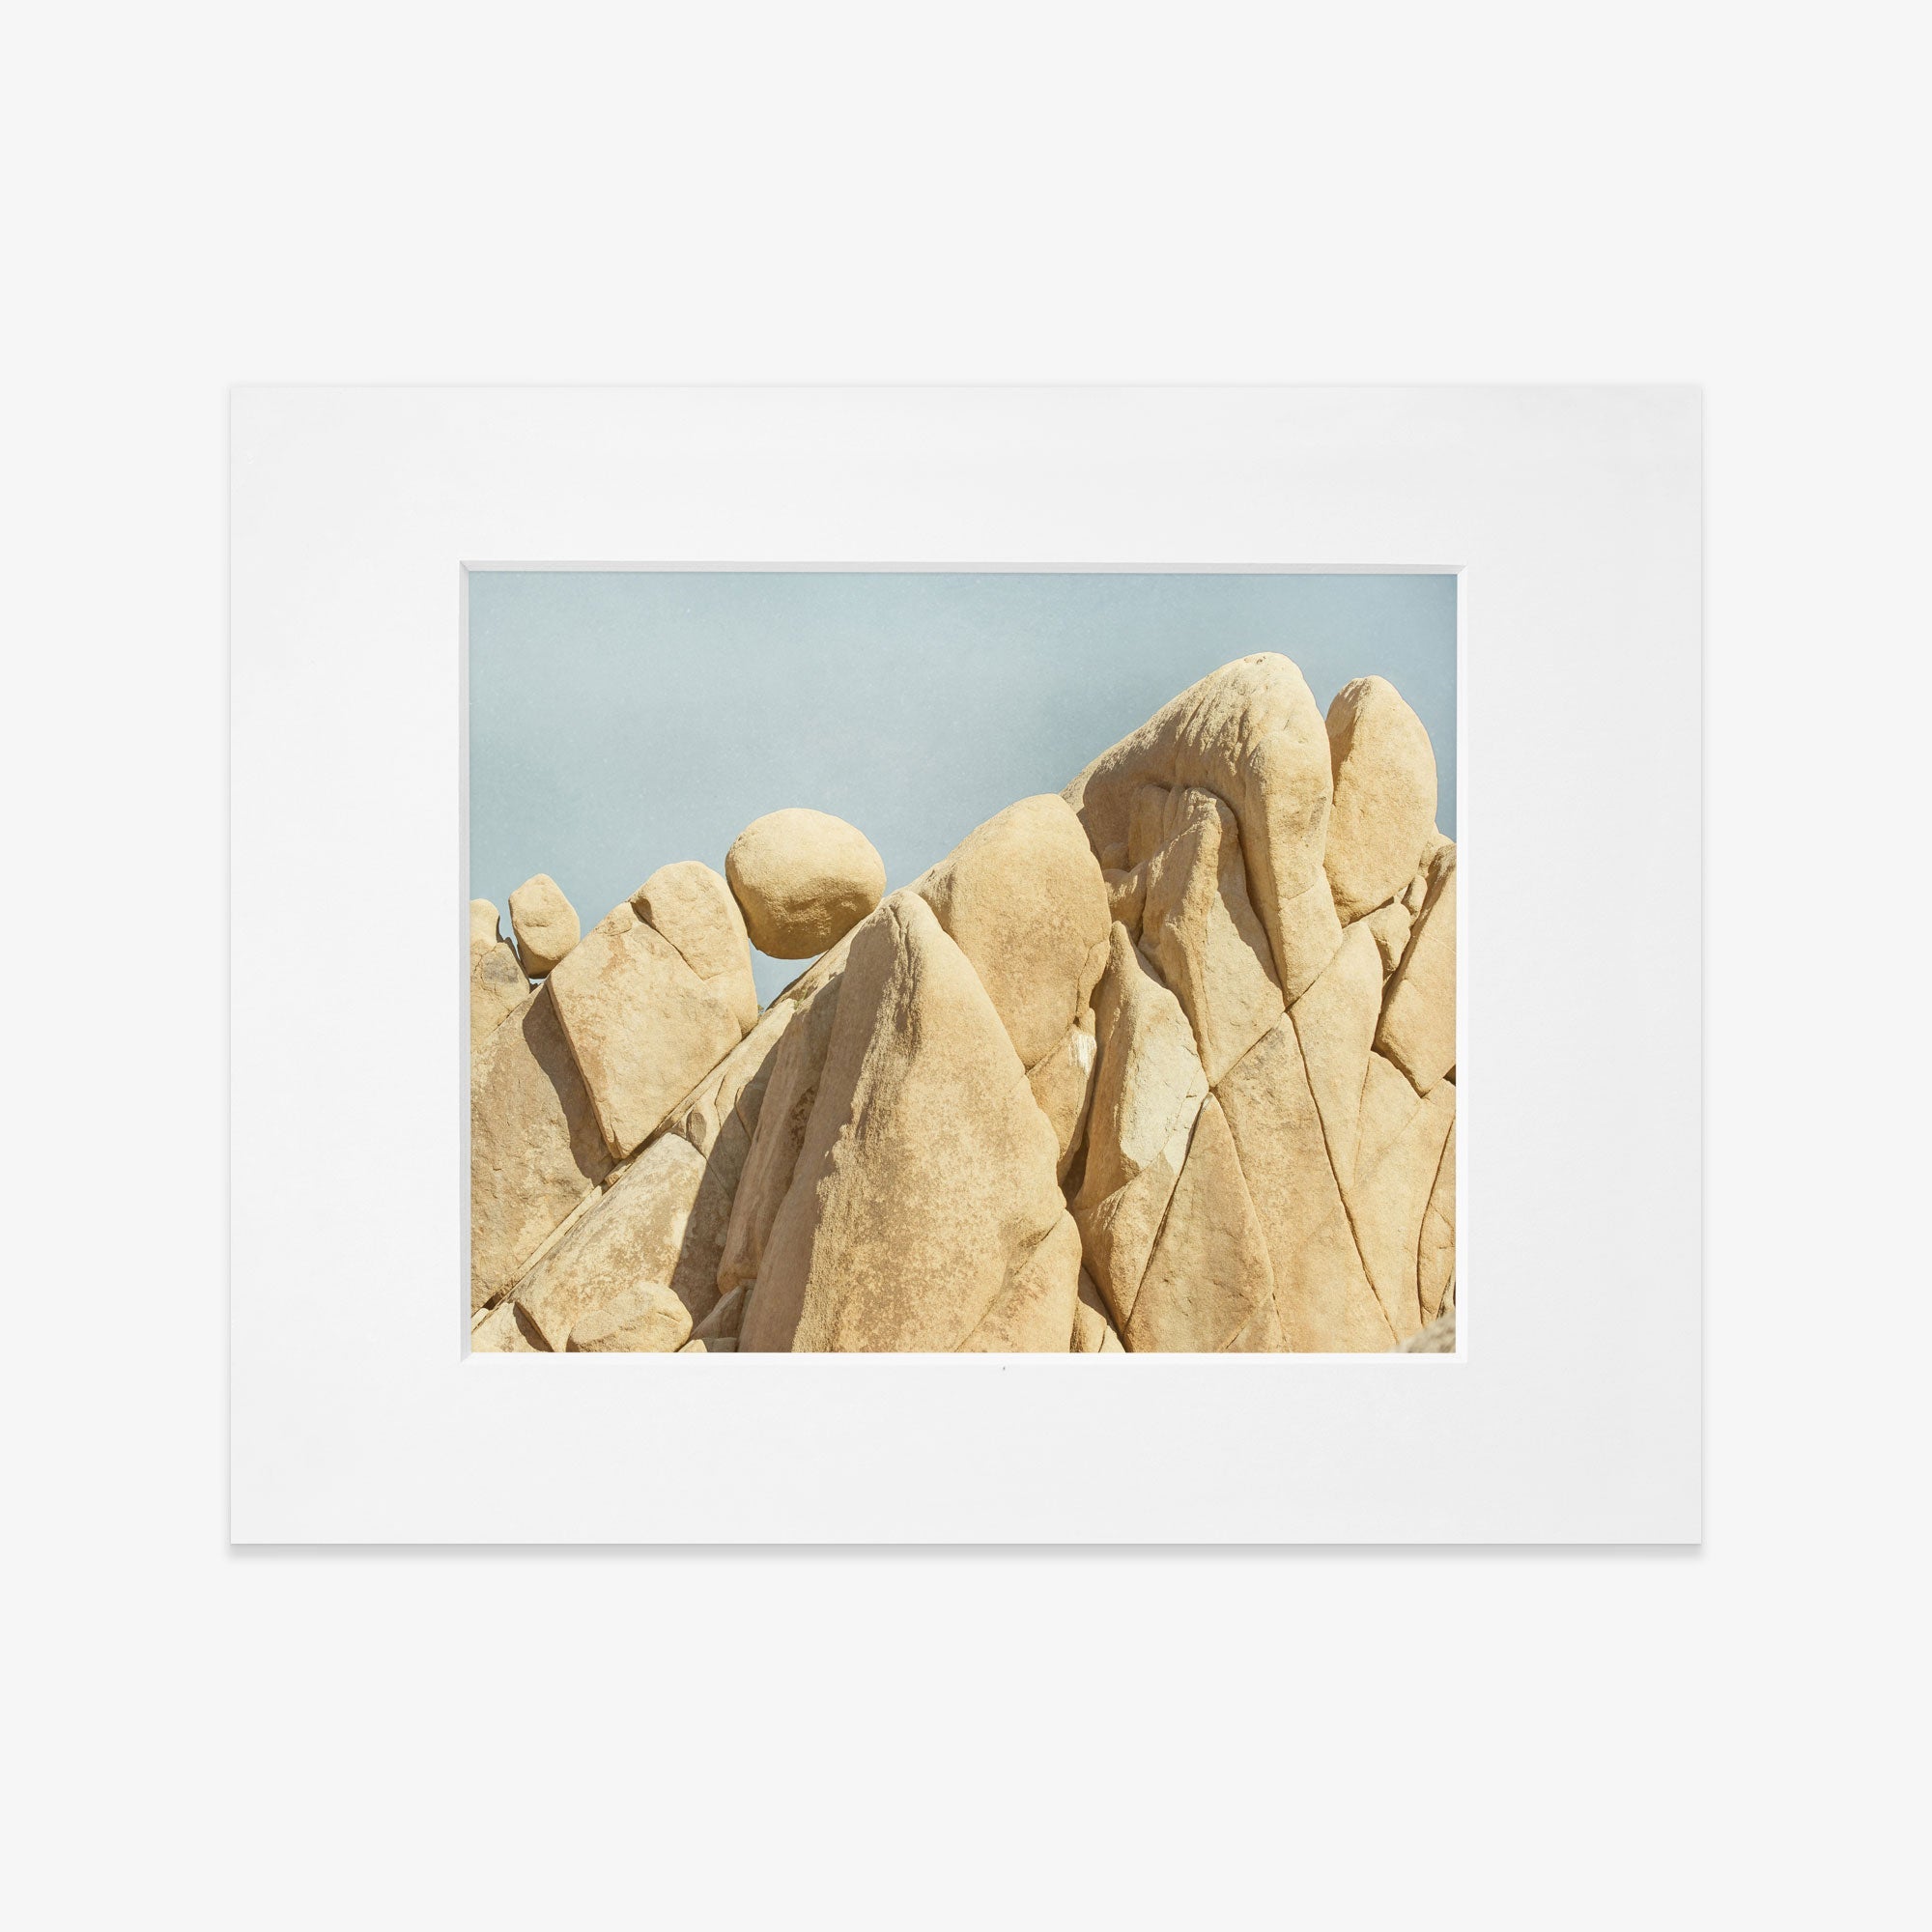 An unframed Joshua Tree Print, &#39;Rock Formations&#39; photograph by Offley Green of unusual, rounded beige rock formations against a clear blue sky. The natural textures and lines on the rocks are distinctly visible.